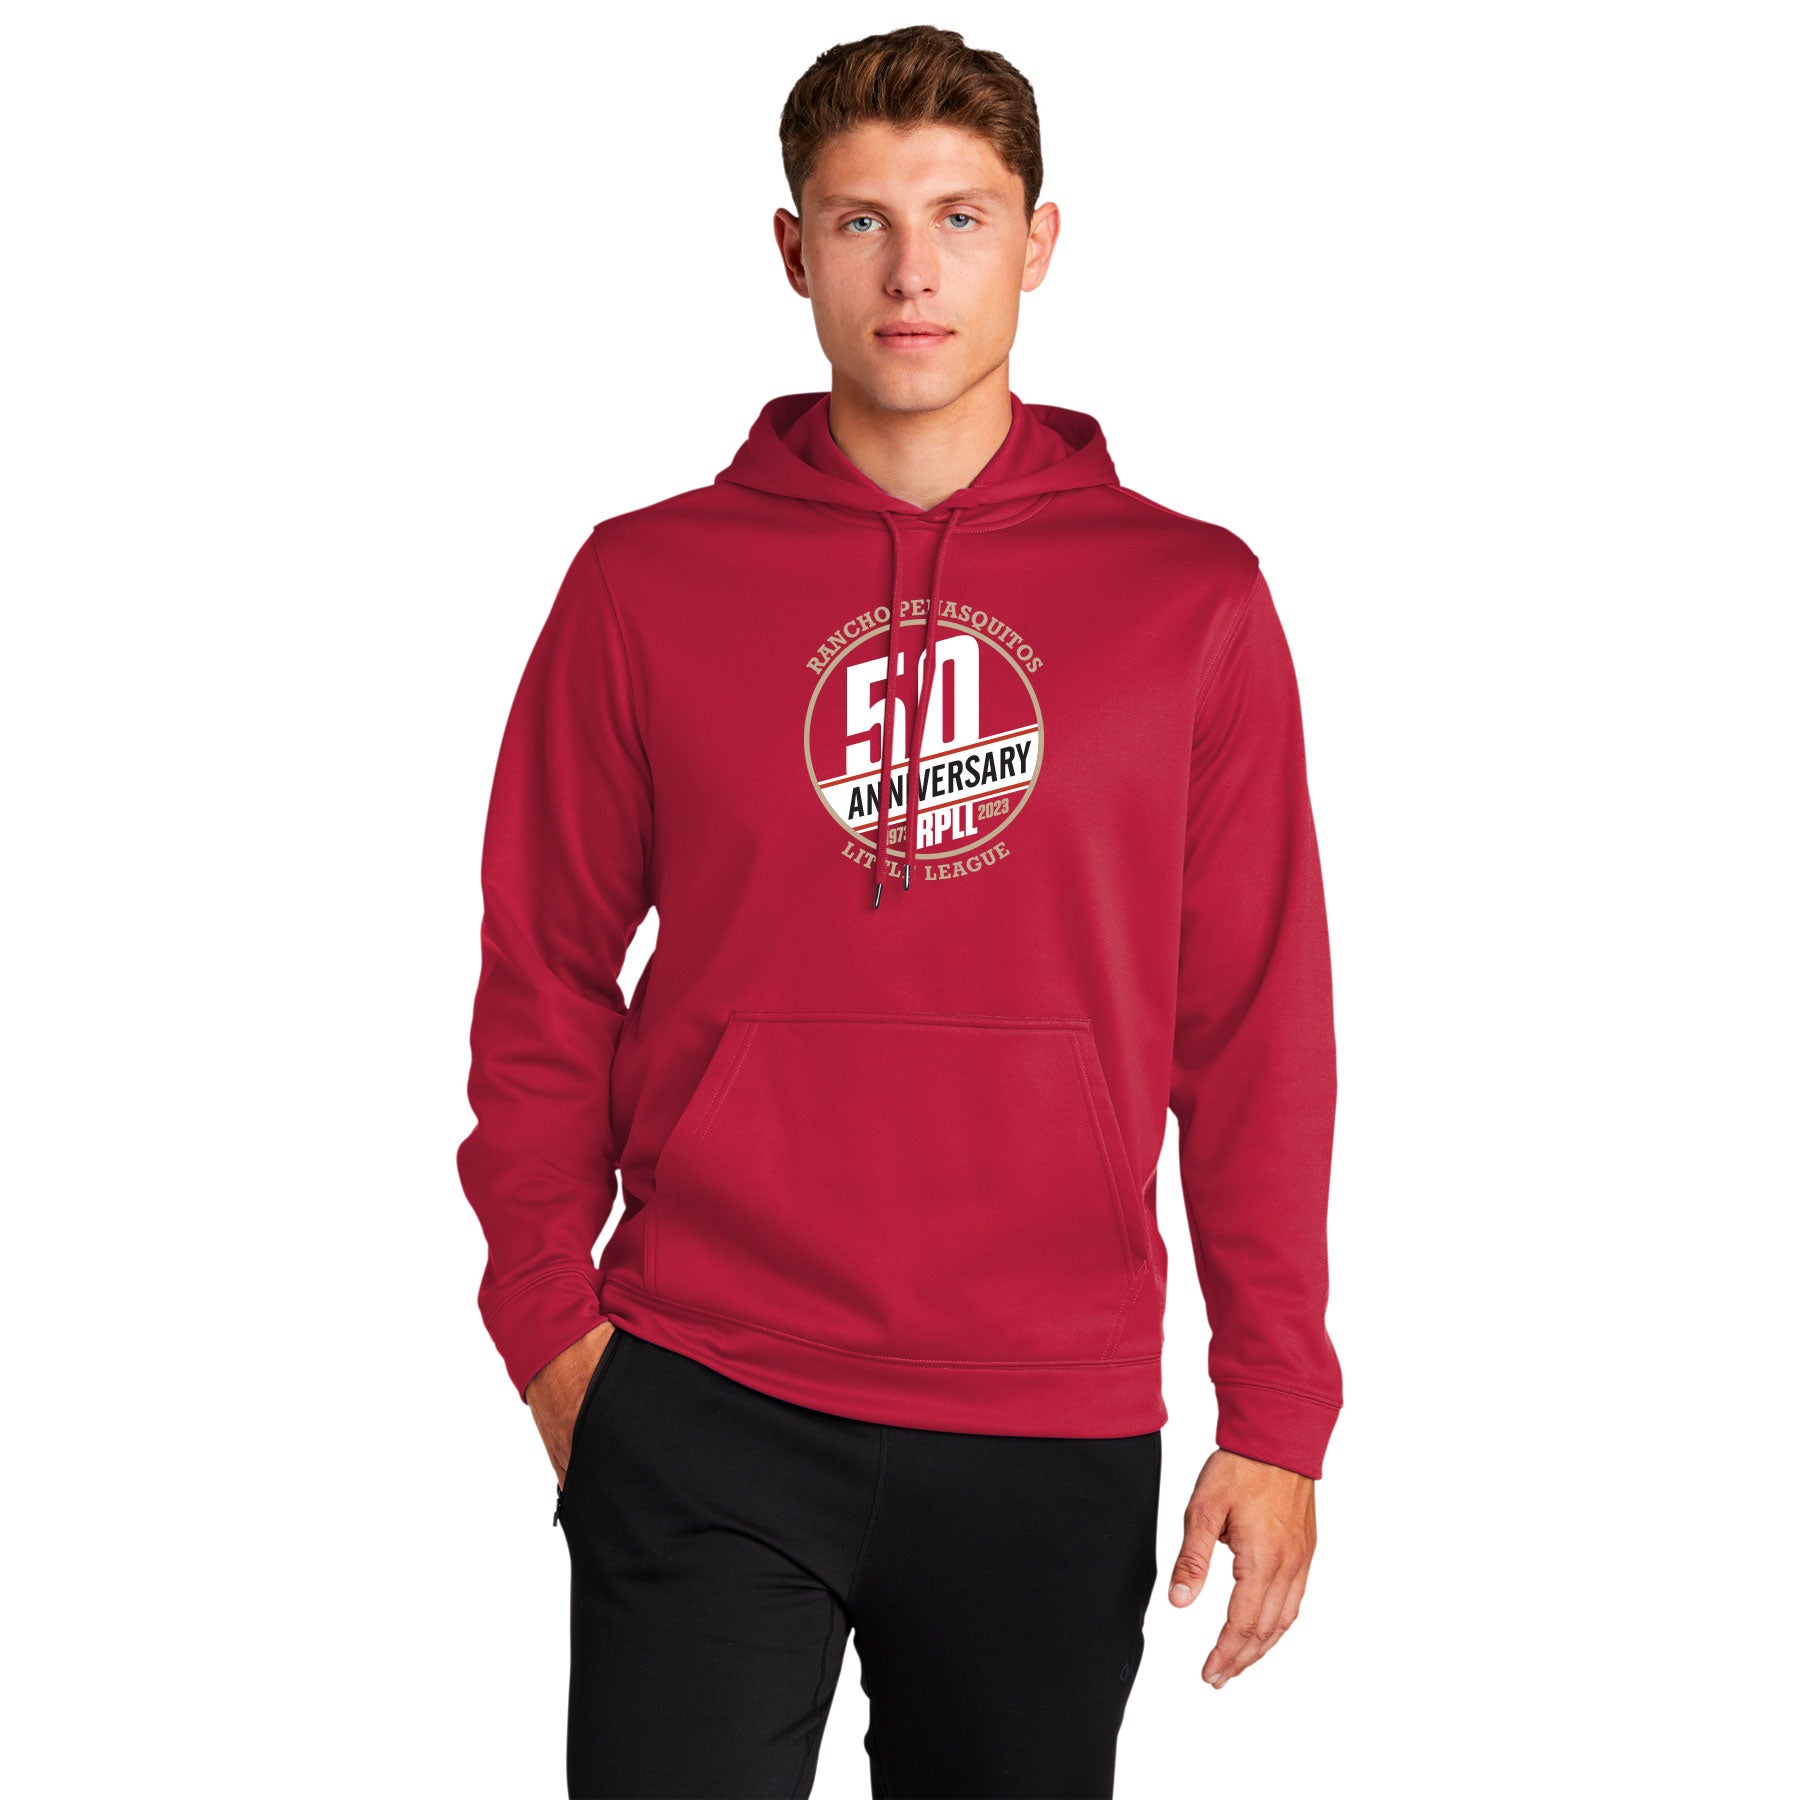 RPLL 50 STAMP ADULT & YOUTH WICKING FLEECE HOODED PULLOVER